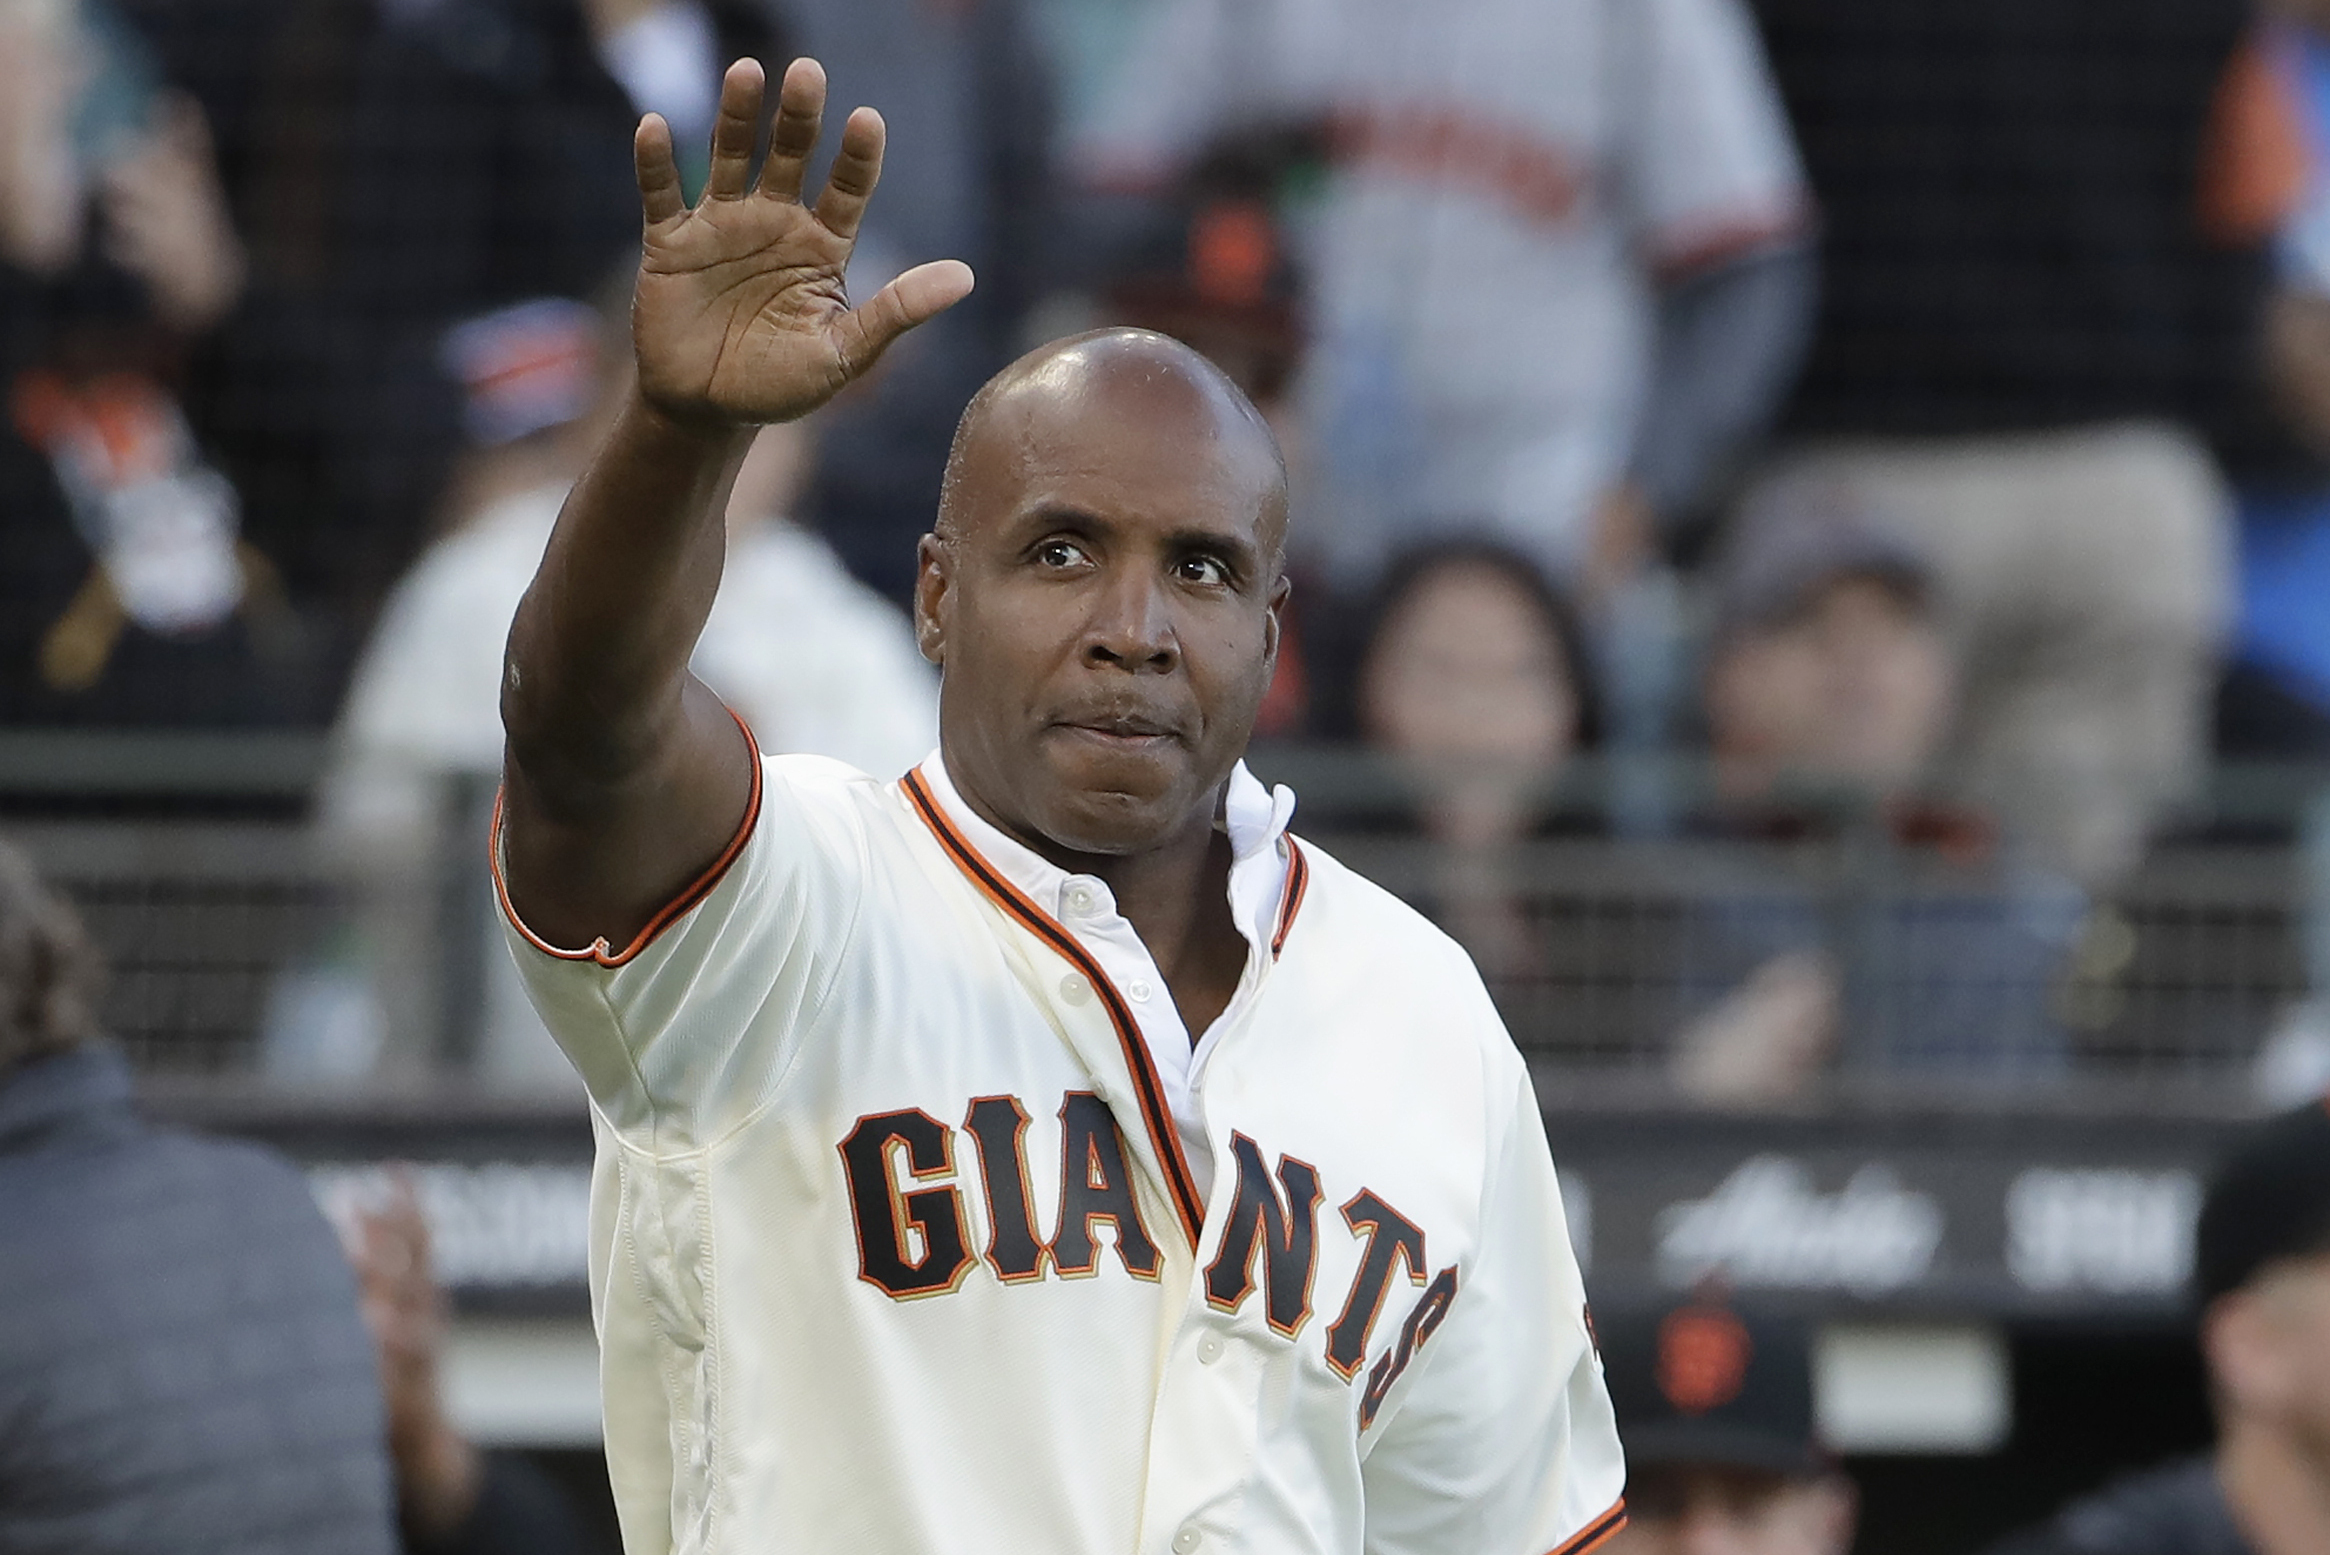 Barry Bonds News, Biography, MLB Records, Stats & Facts